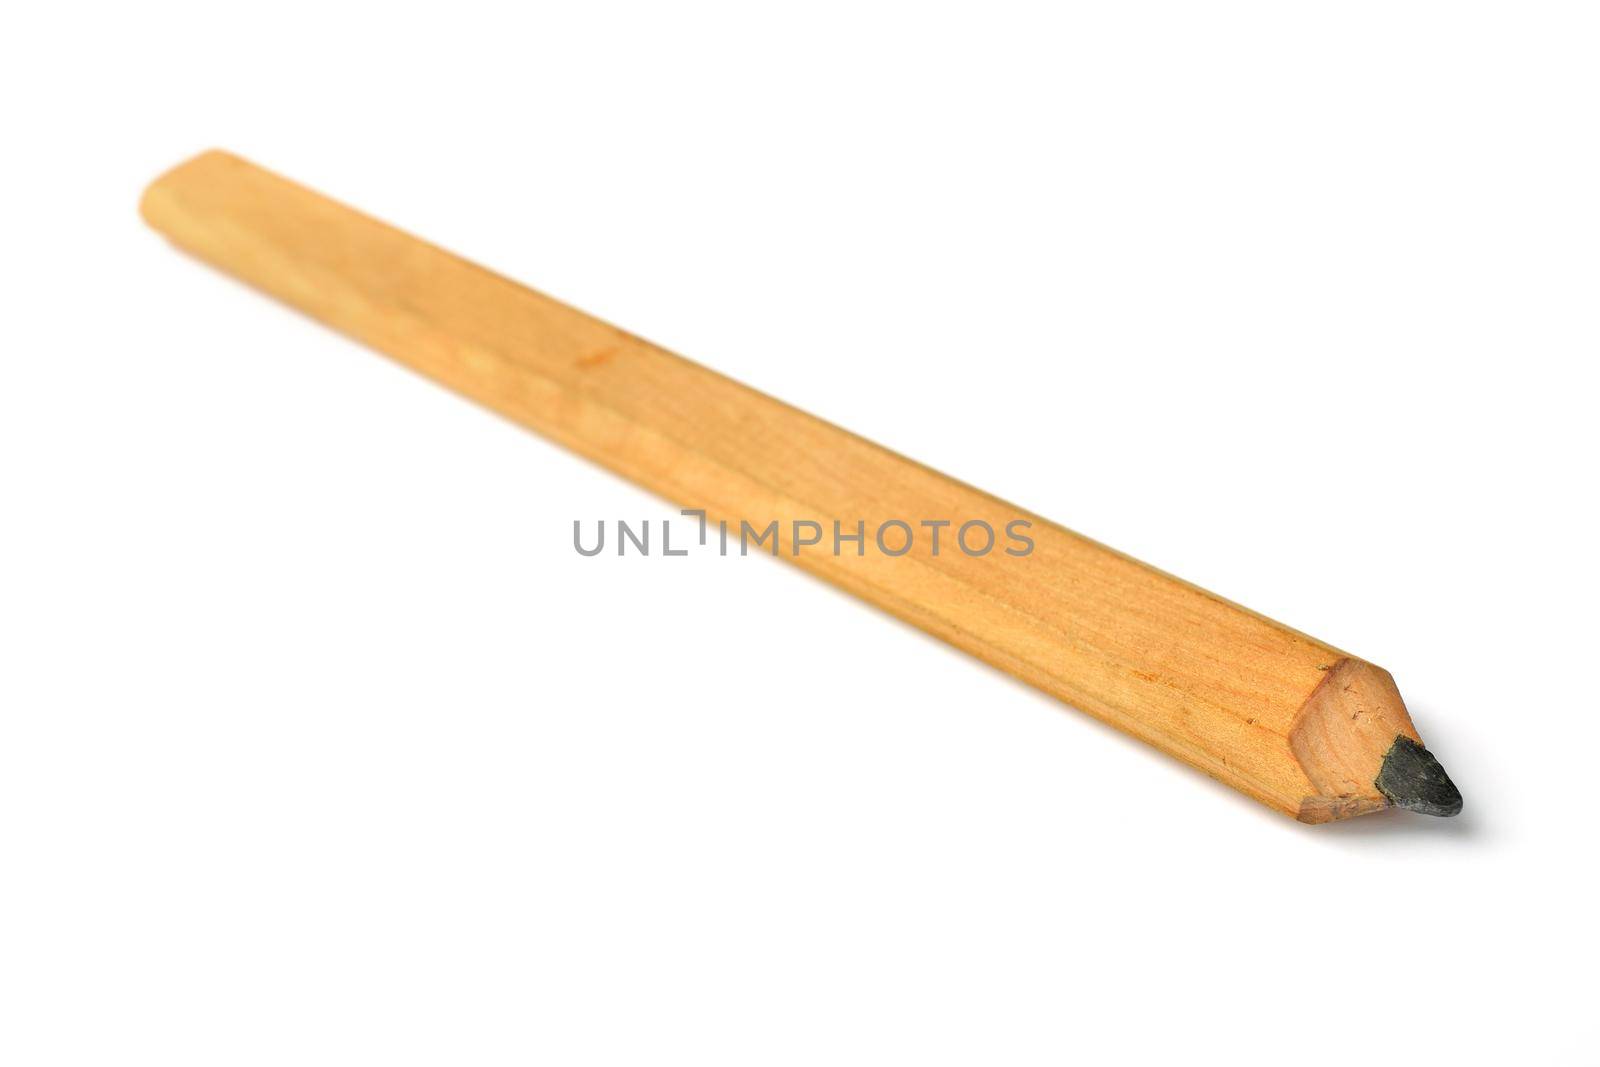 Carpenter's Pencil Isolated on a White Background by markvandam